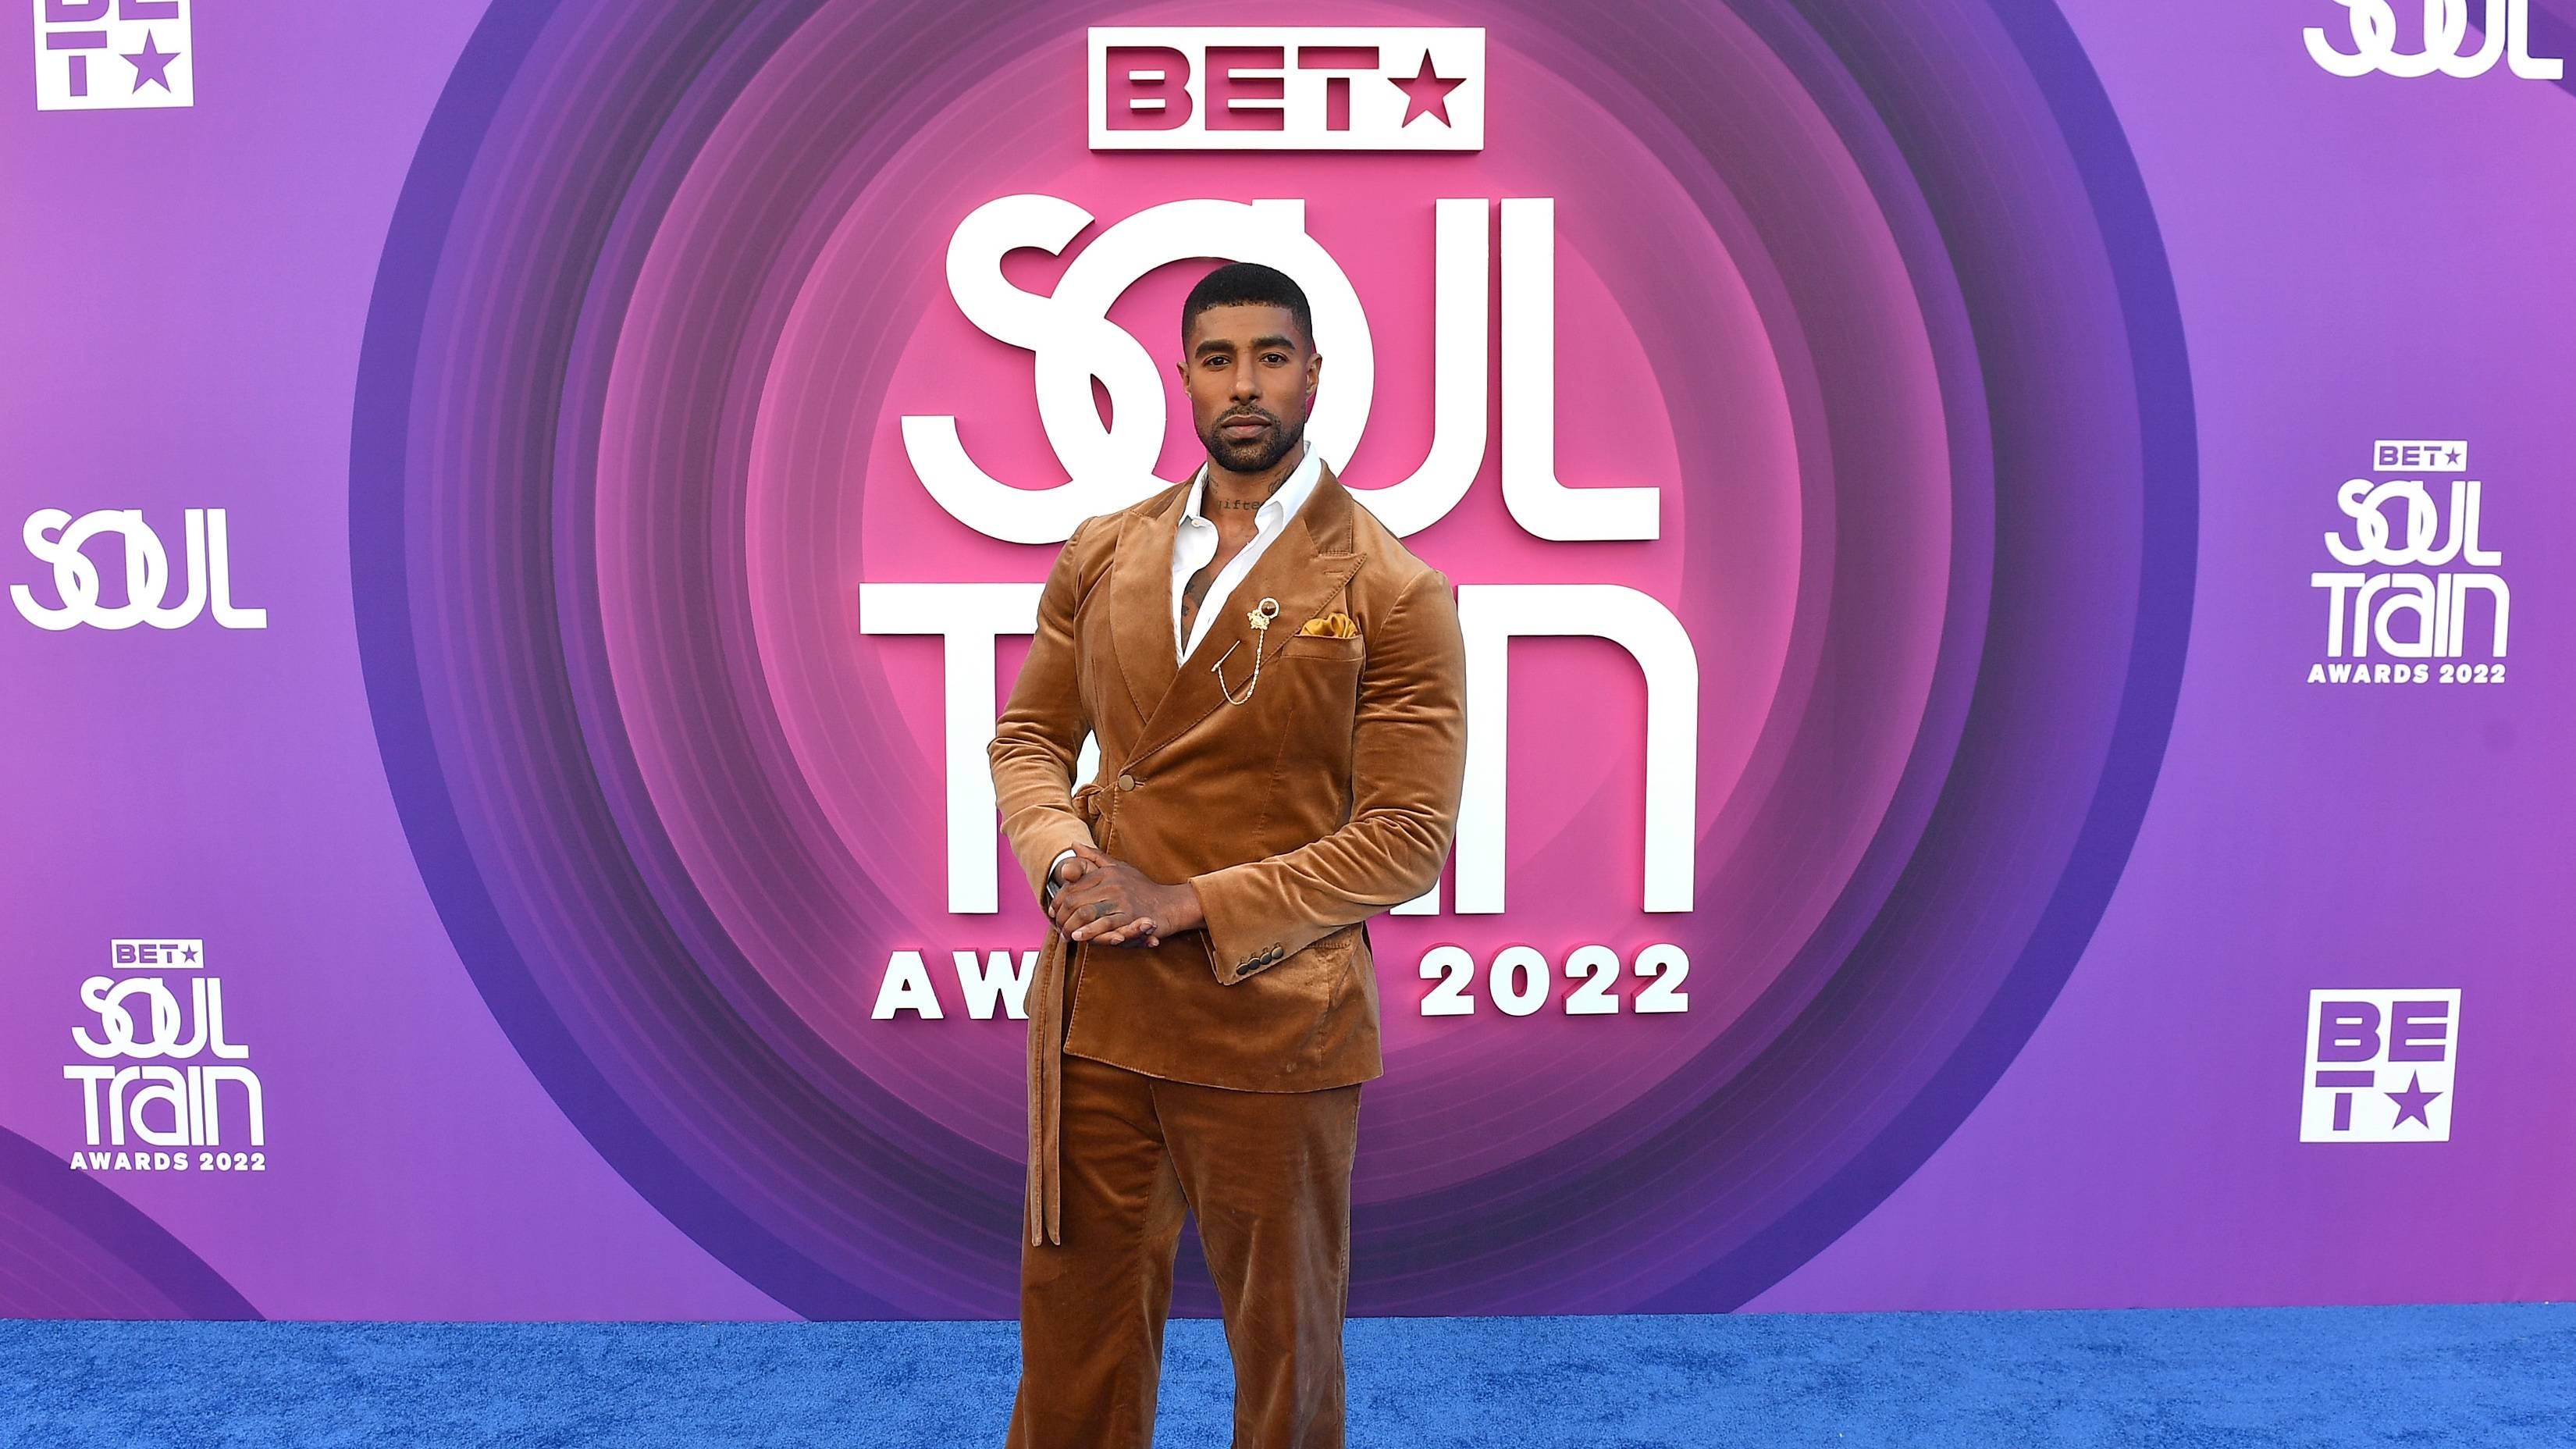 Soul Train Awards 2022 Get to Know Hollywood’s Rising Commodity, Skyh